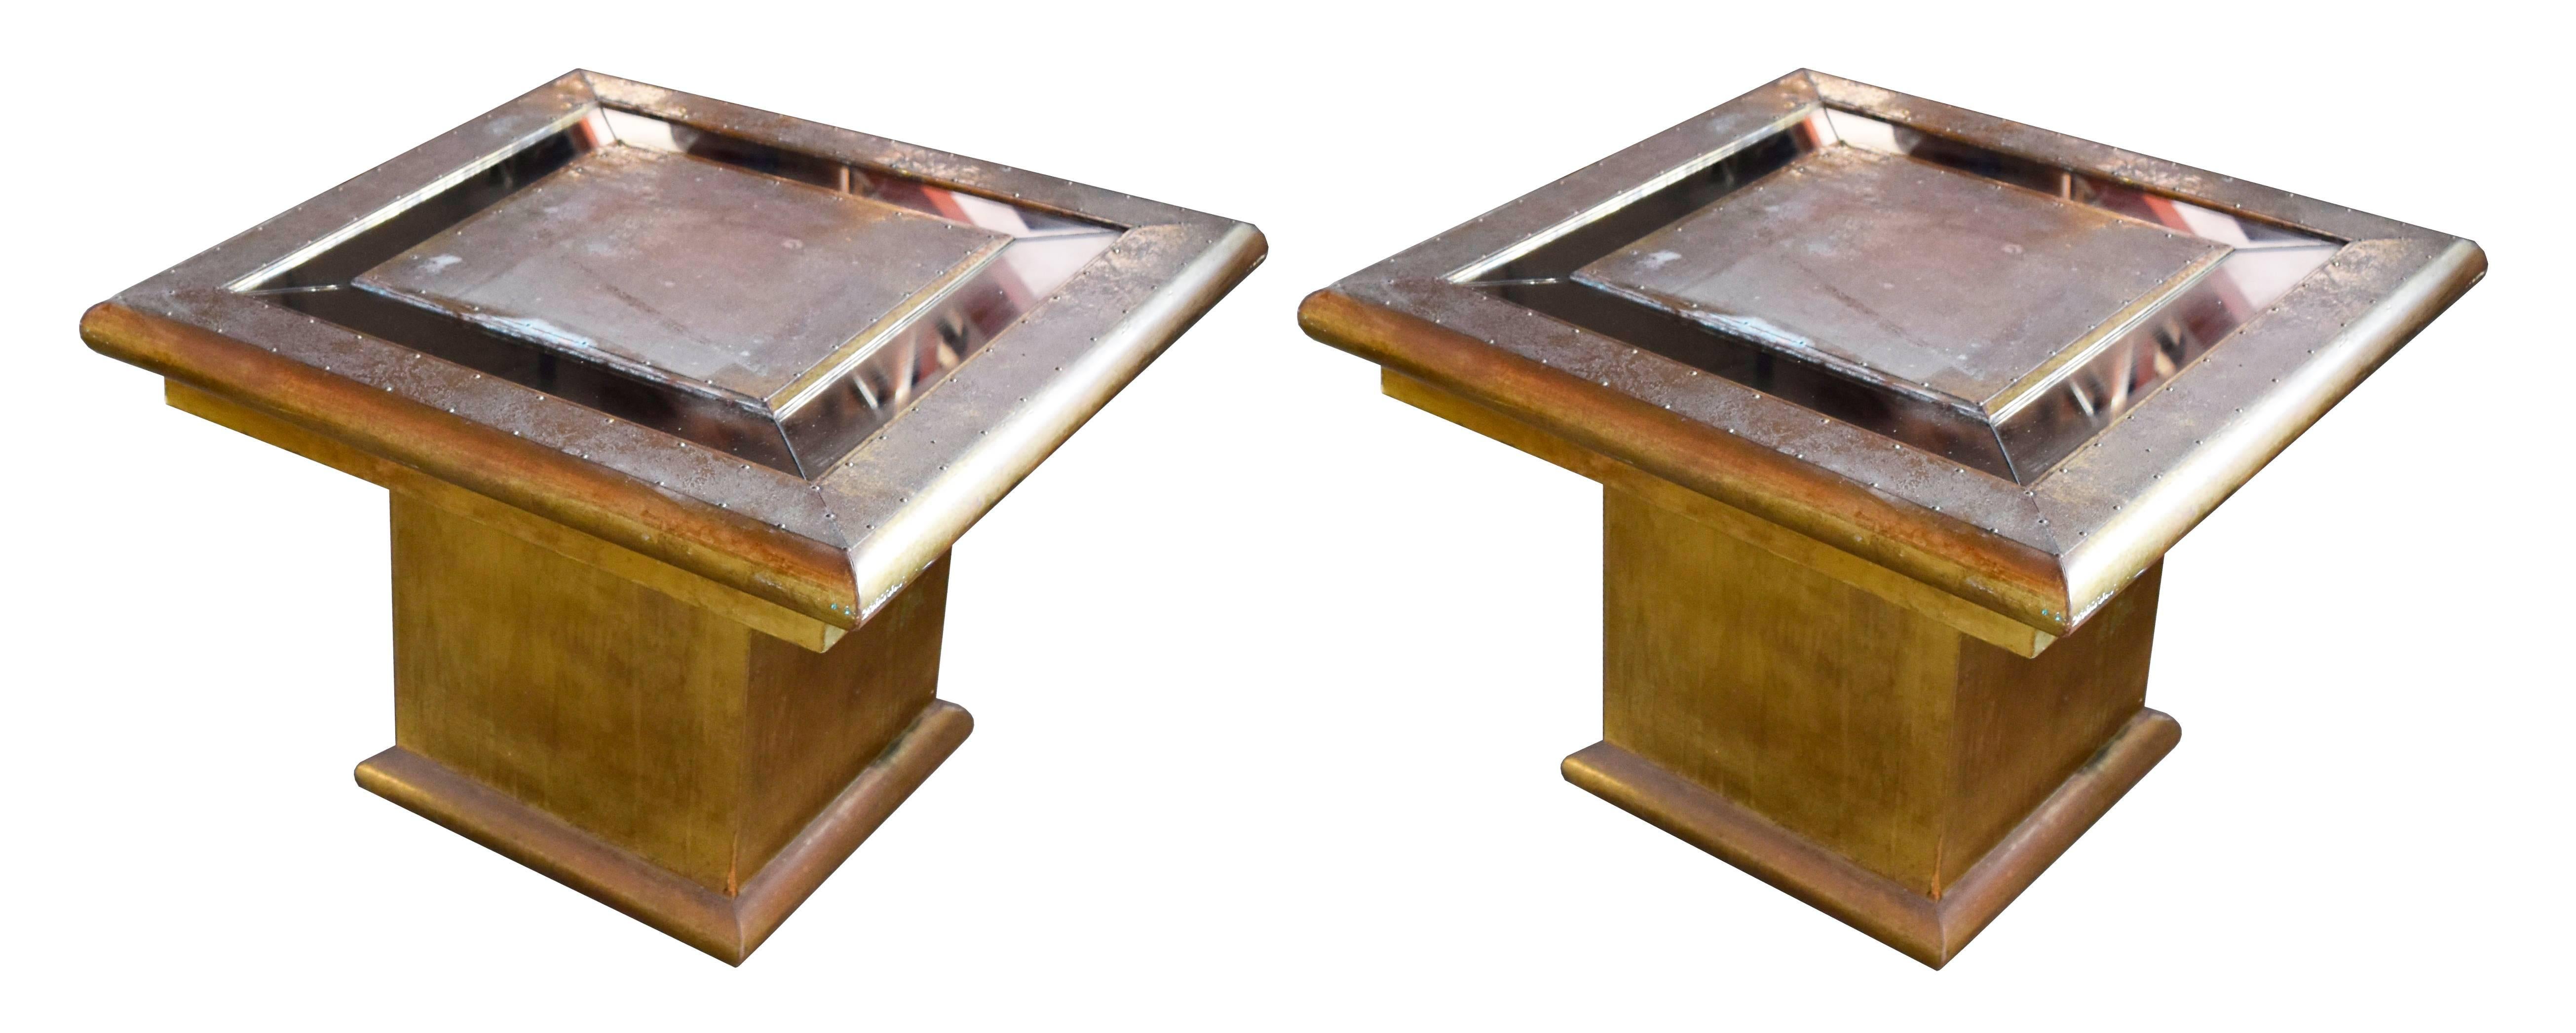 Handcrafted with fine brass sheets etched over a wooden frame and covered with smoked mirrors. 

Rodolfo Dubarry arrived in the 1970s in Spain and worked tirelessly. His first special creation was the fireplace of the Menchú, the most exclusive